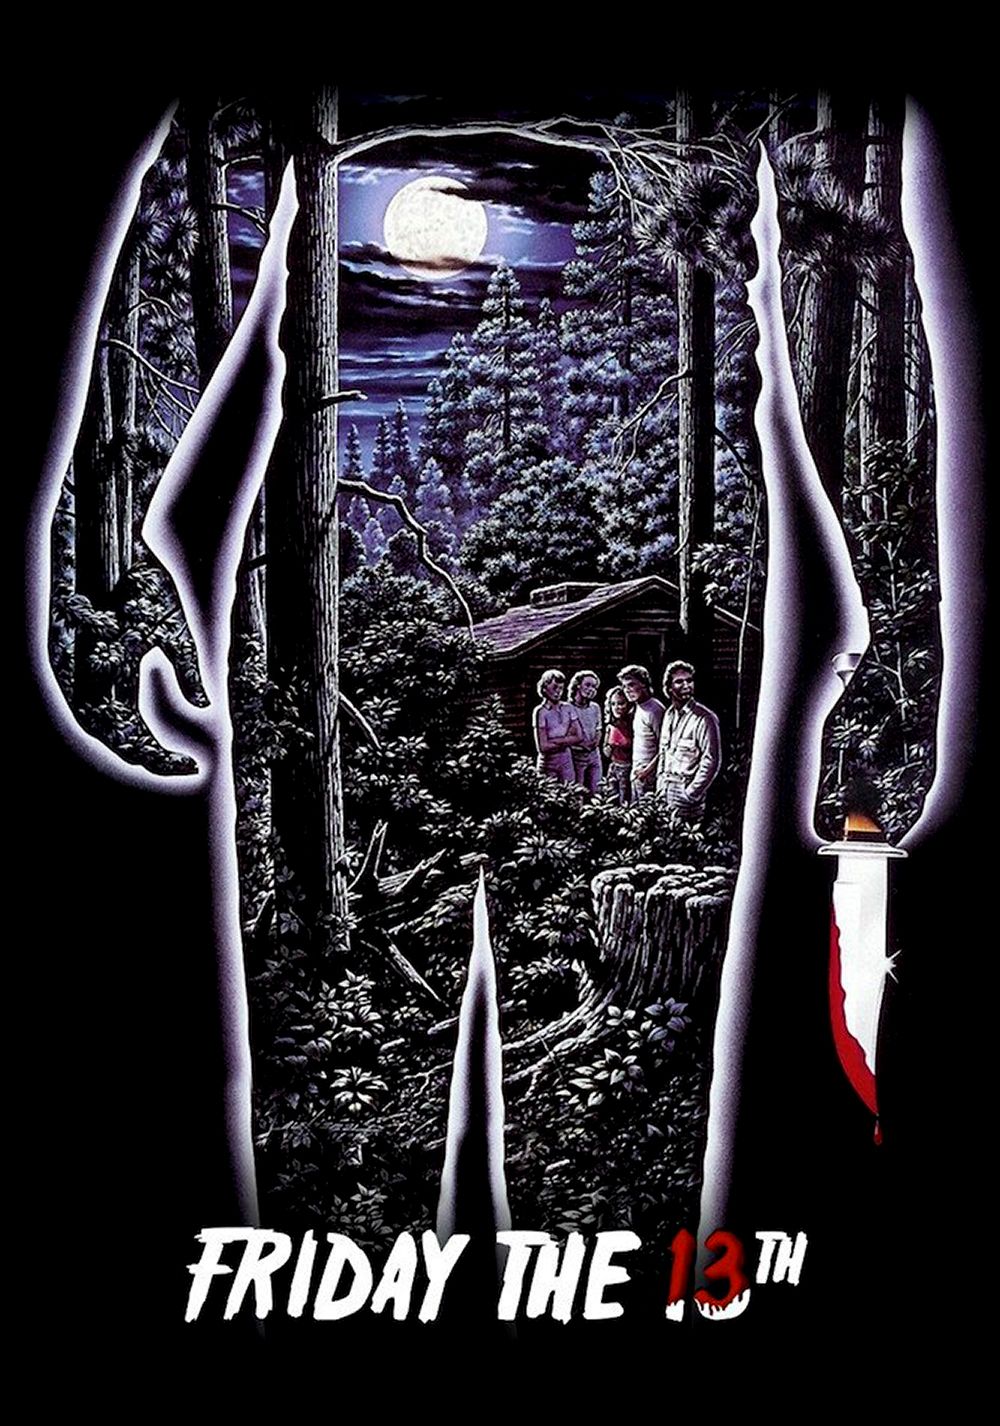 Poster for the original Friday the 13th